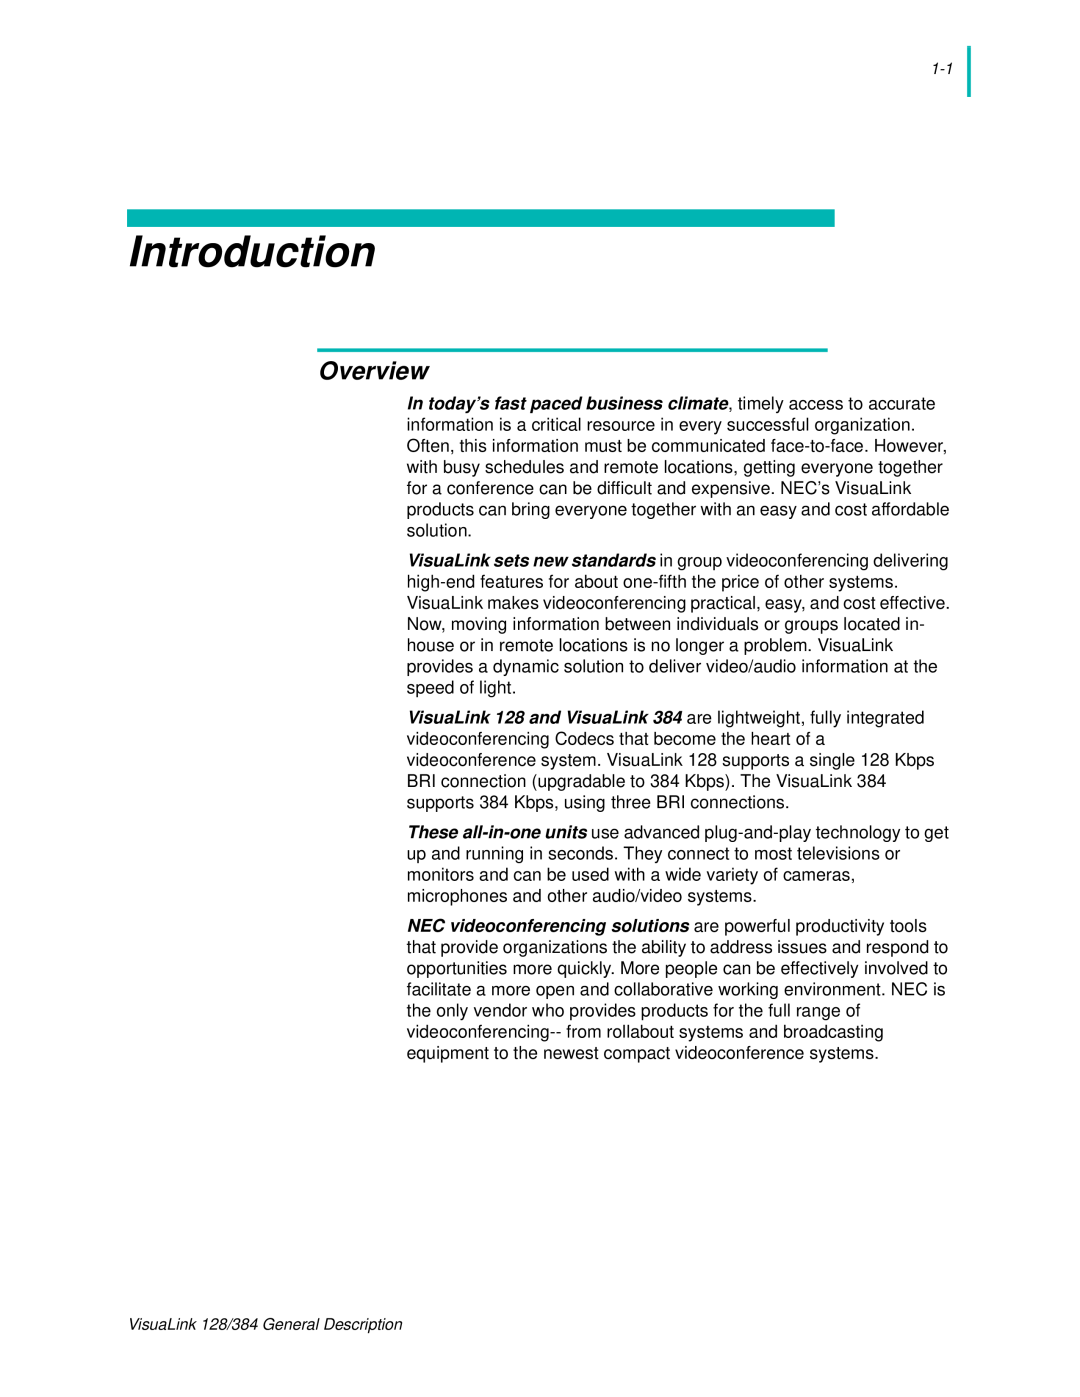 NEC 128 manual Introduction, Overview 